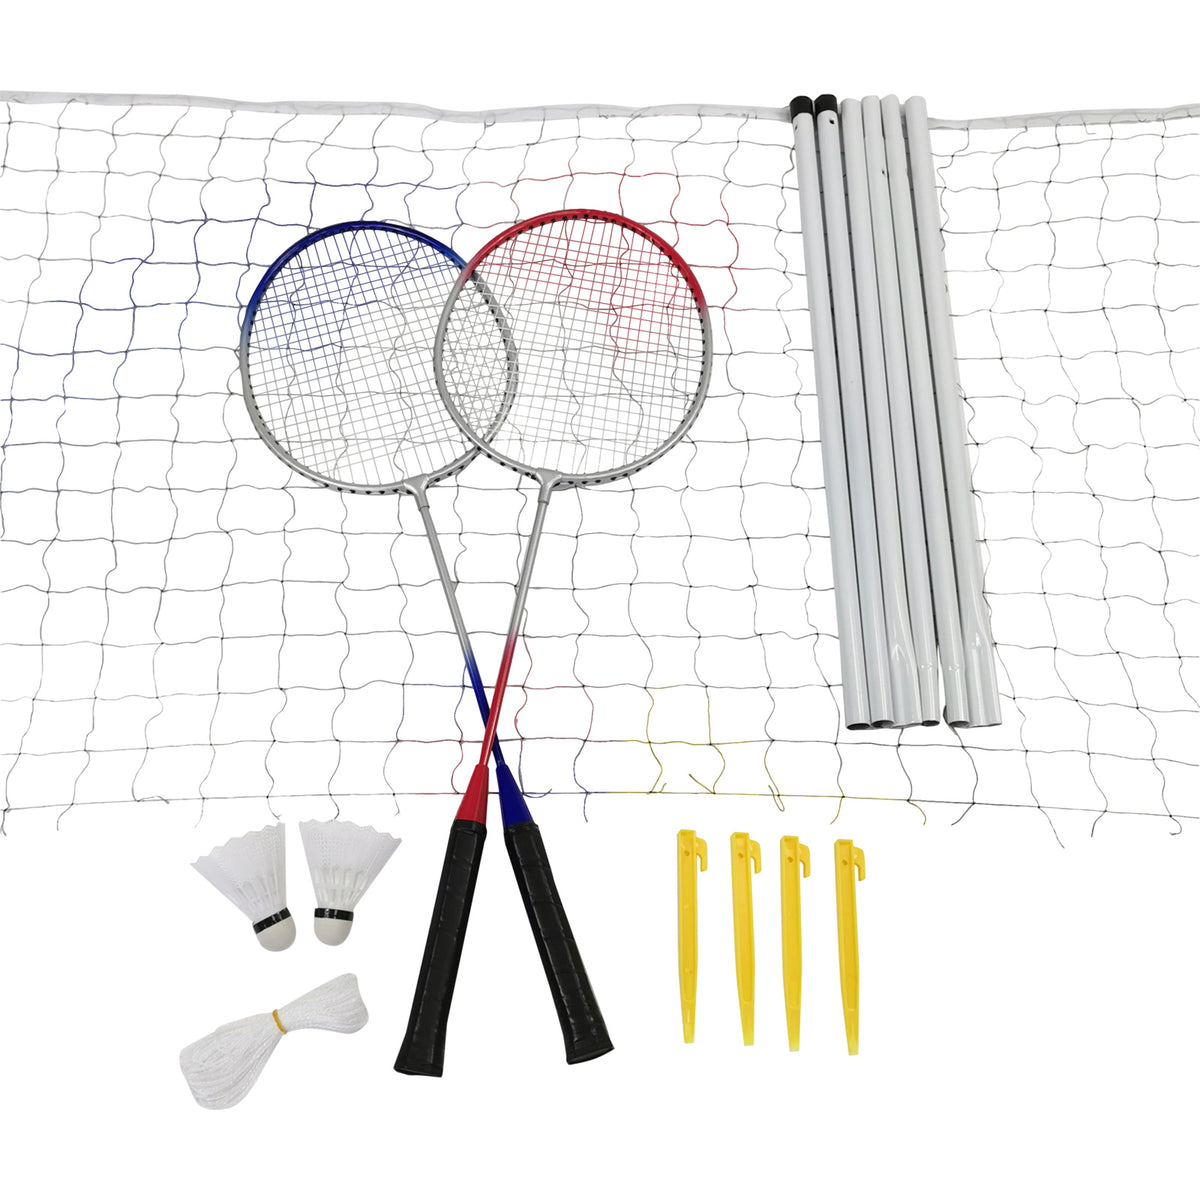 2 Player Badminton Set with Net